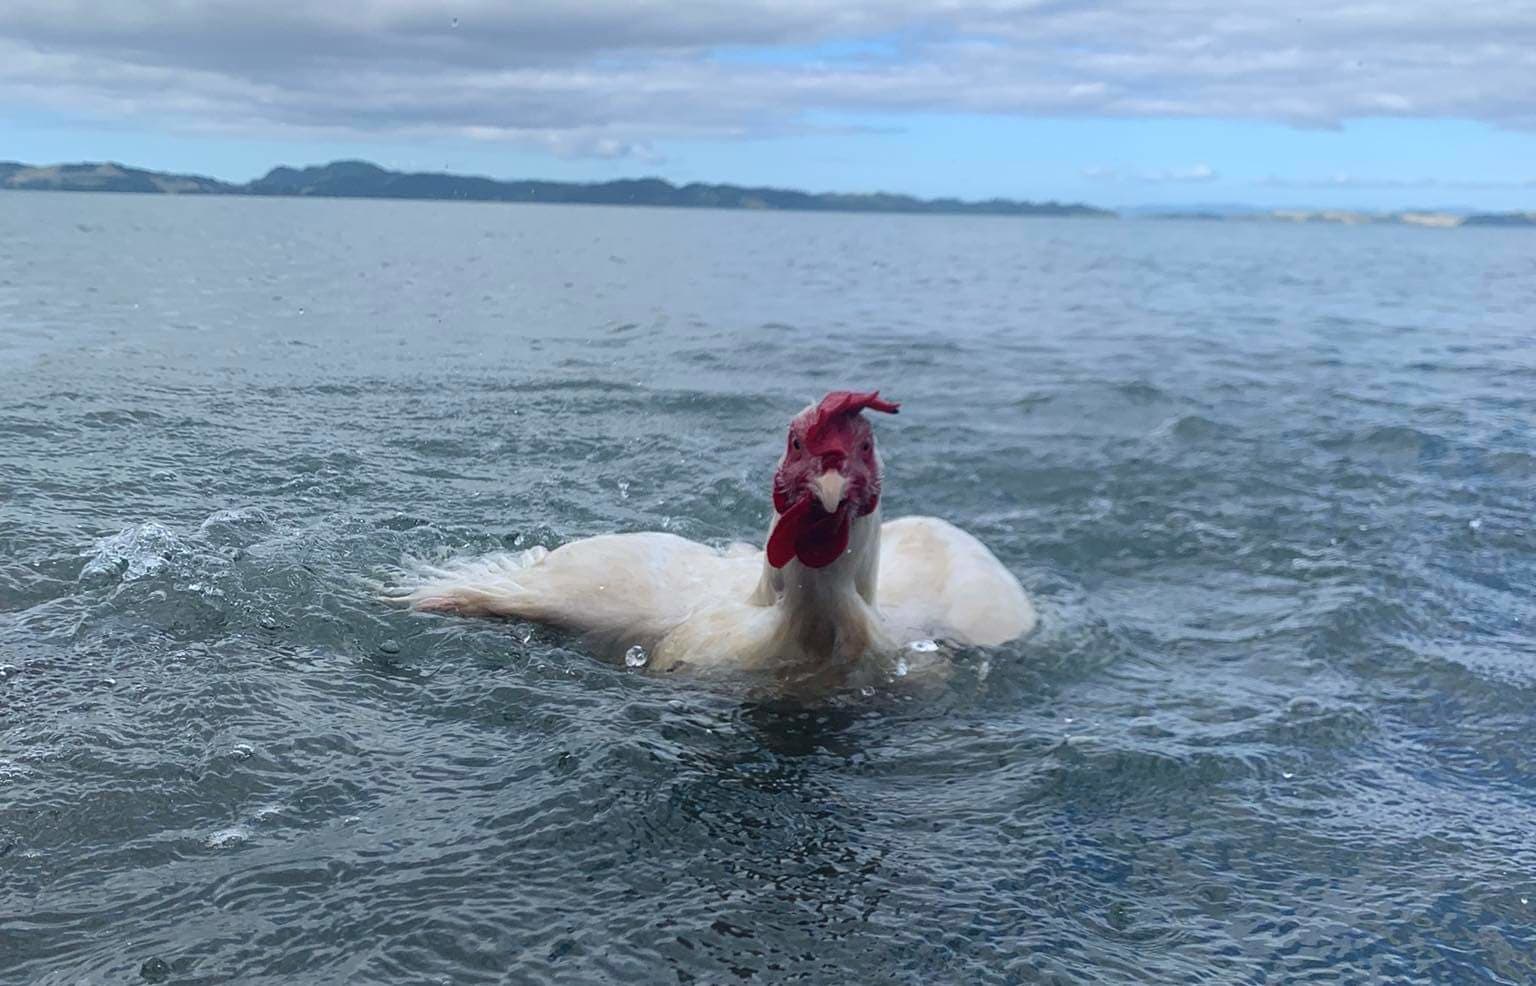 Gall the swimming chicken is on the hunt for a rooster mate | RNZ